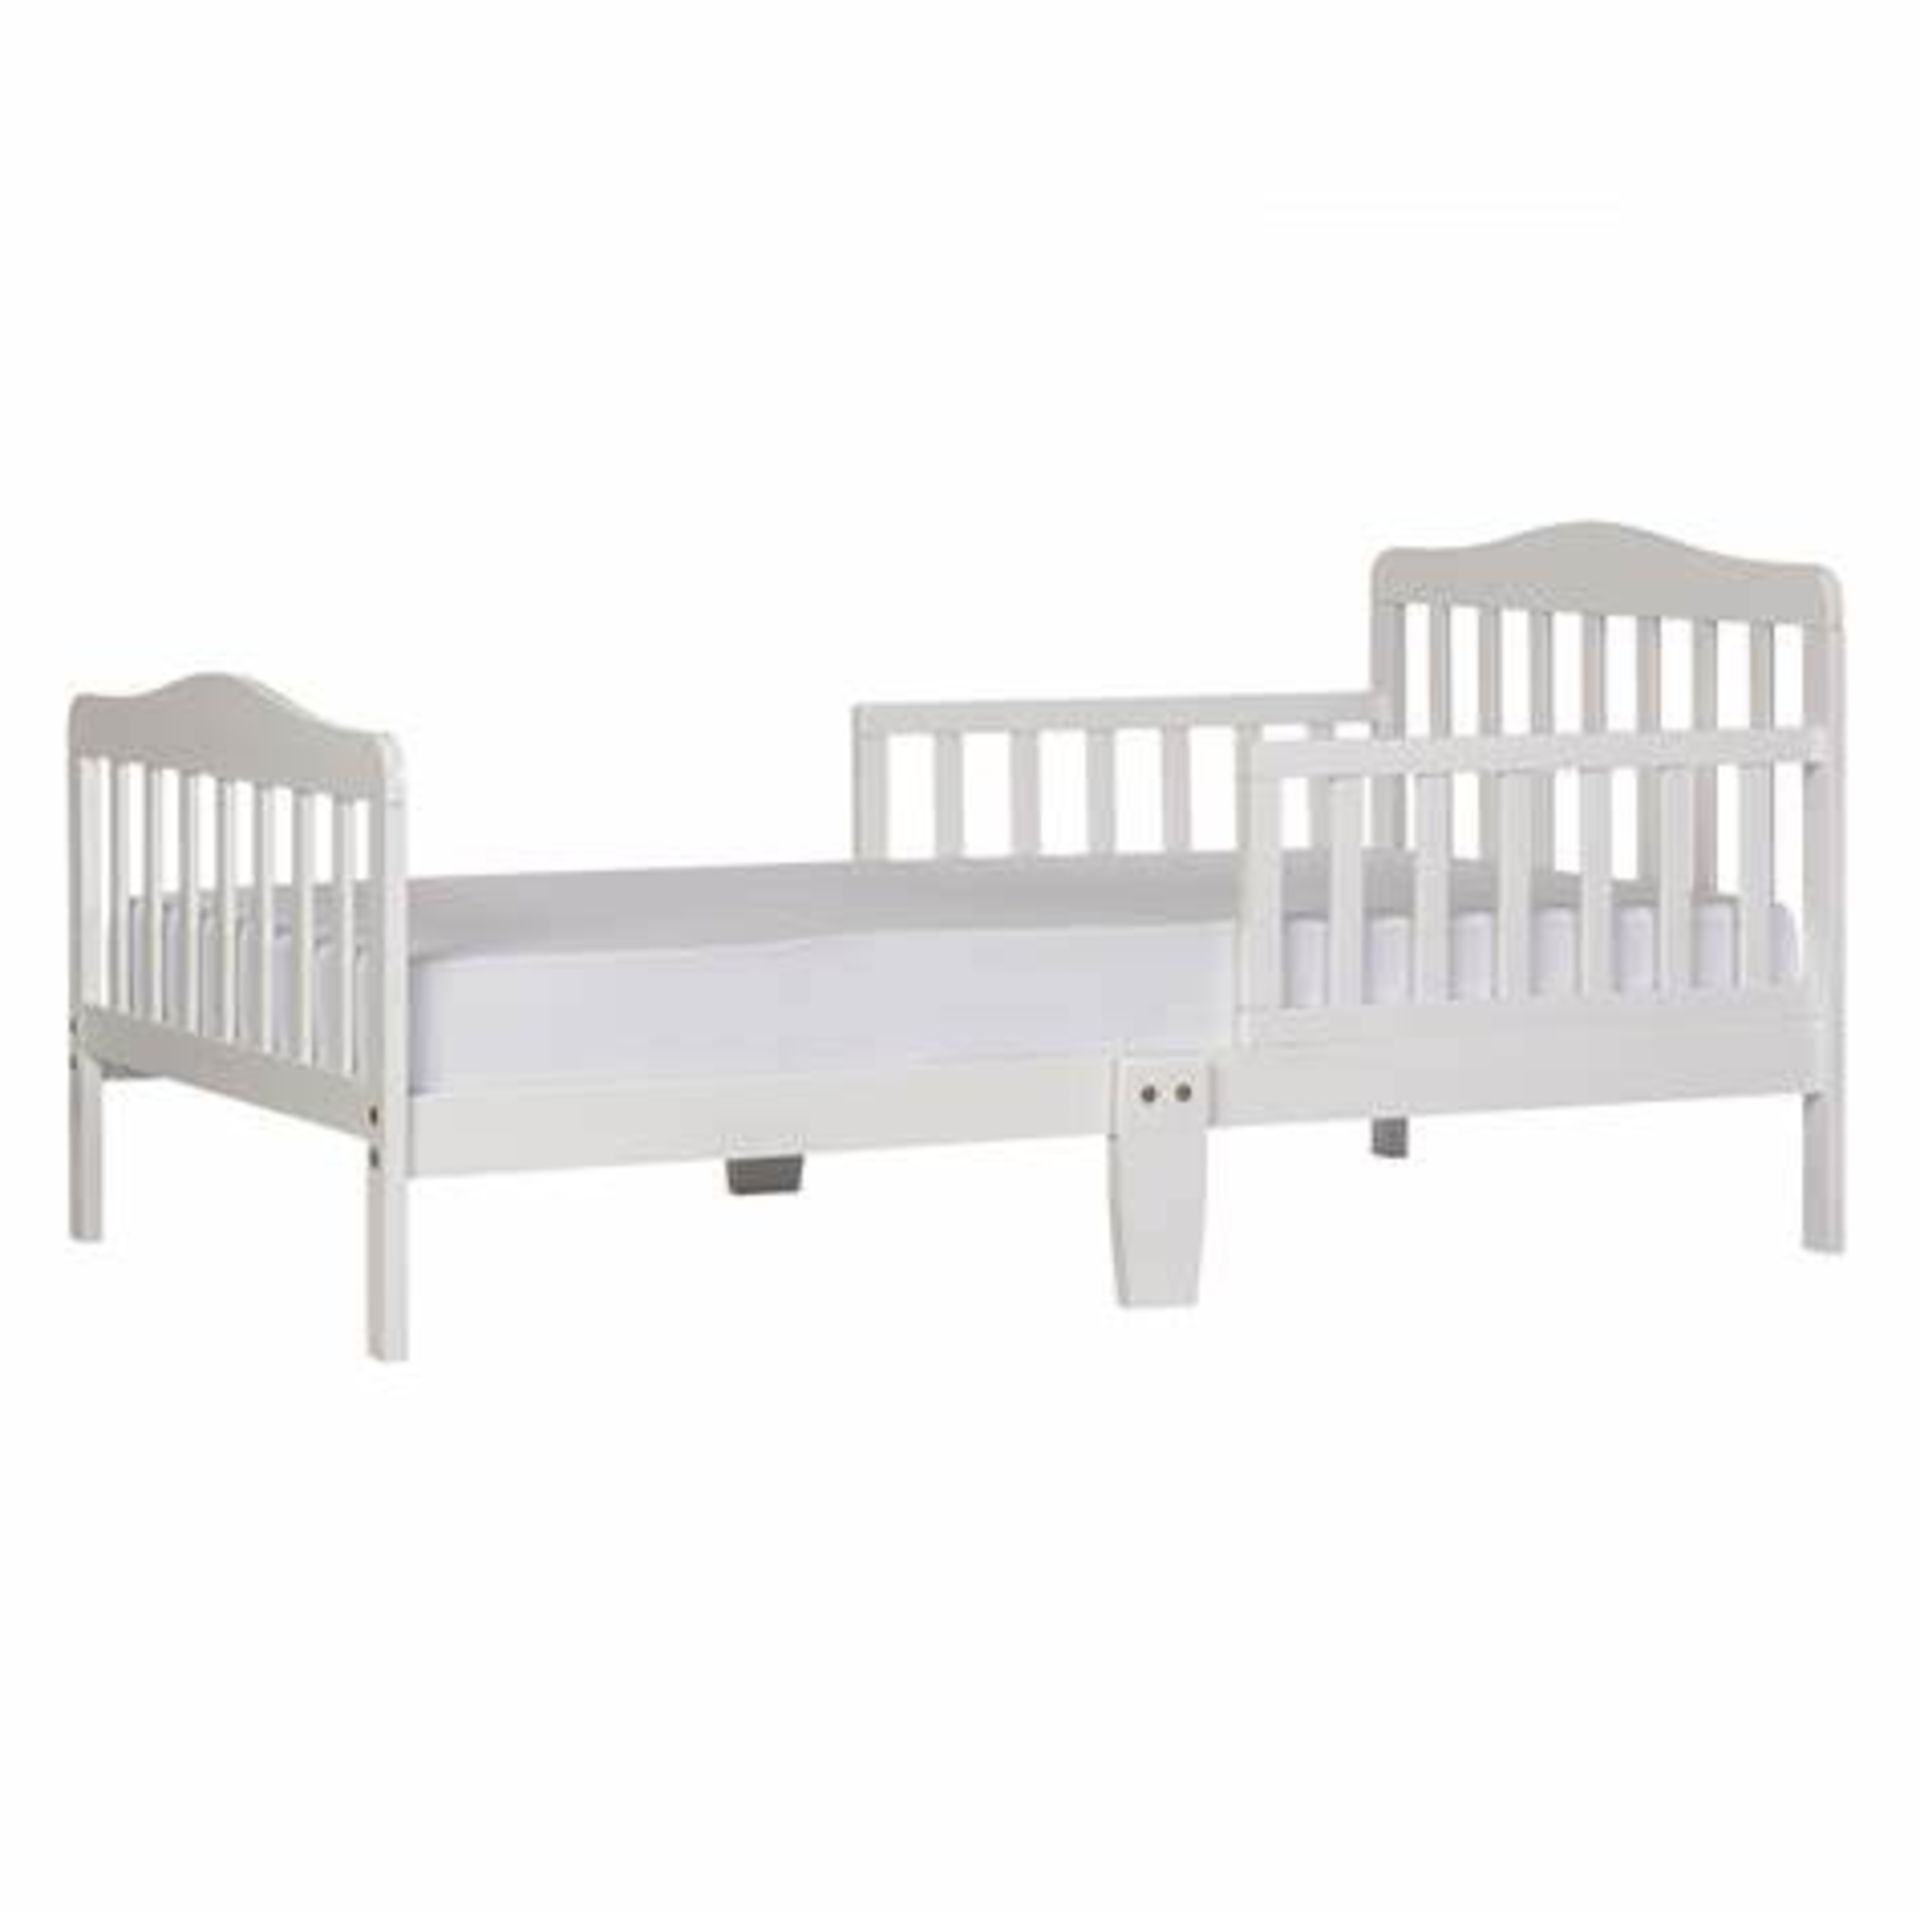 Brand New Dream on Me Classic Toddler Bed. Product dimensionS - 144.8L x 71.1W x 76.2H CM Comes with - Bild 2 aus 4